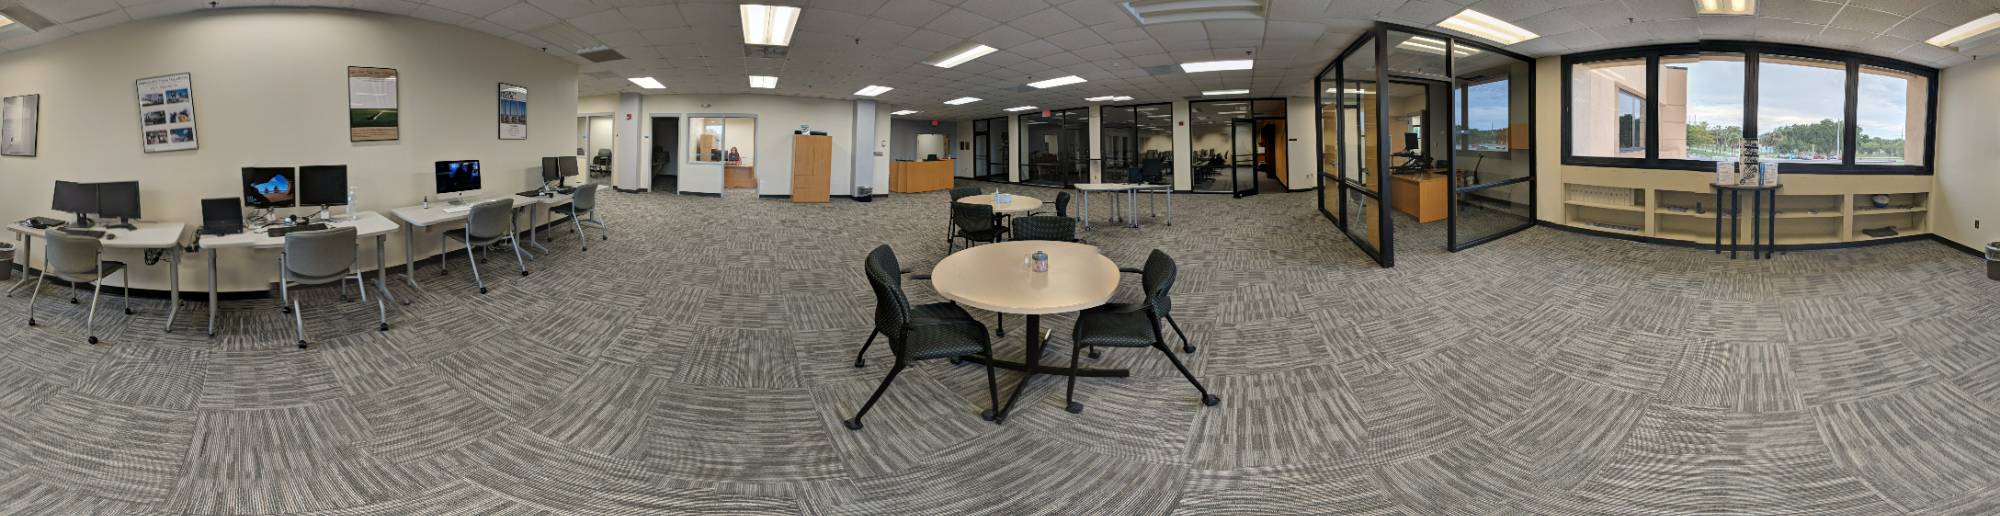 empty work spaces in the faculty innovation center